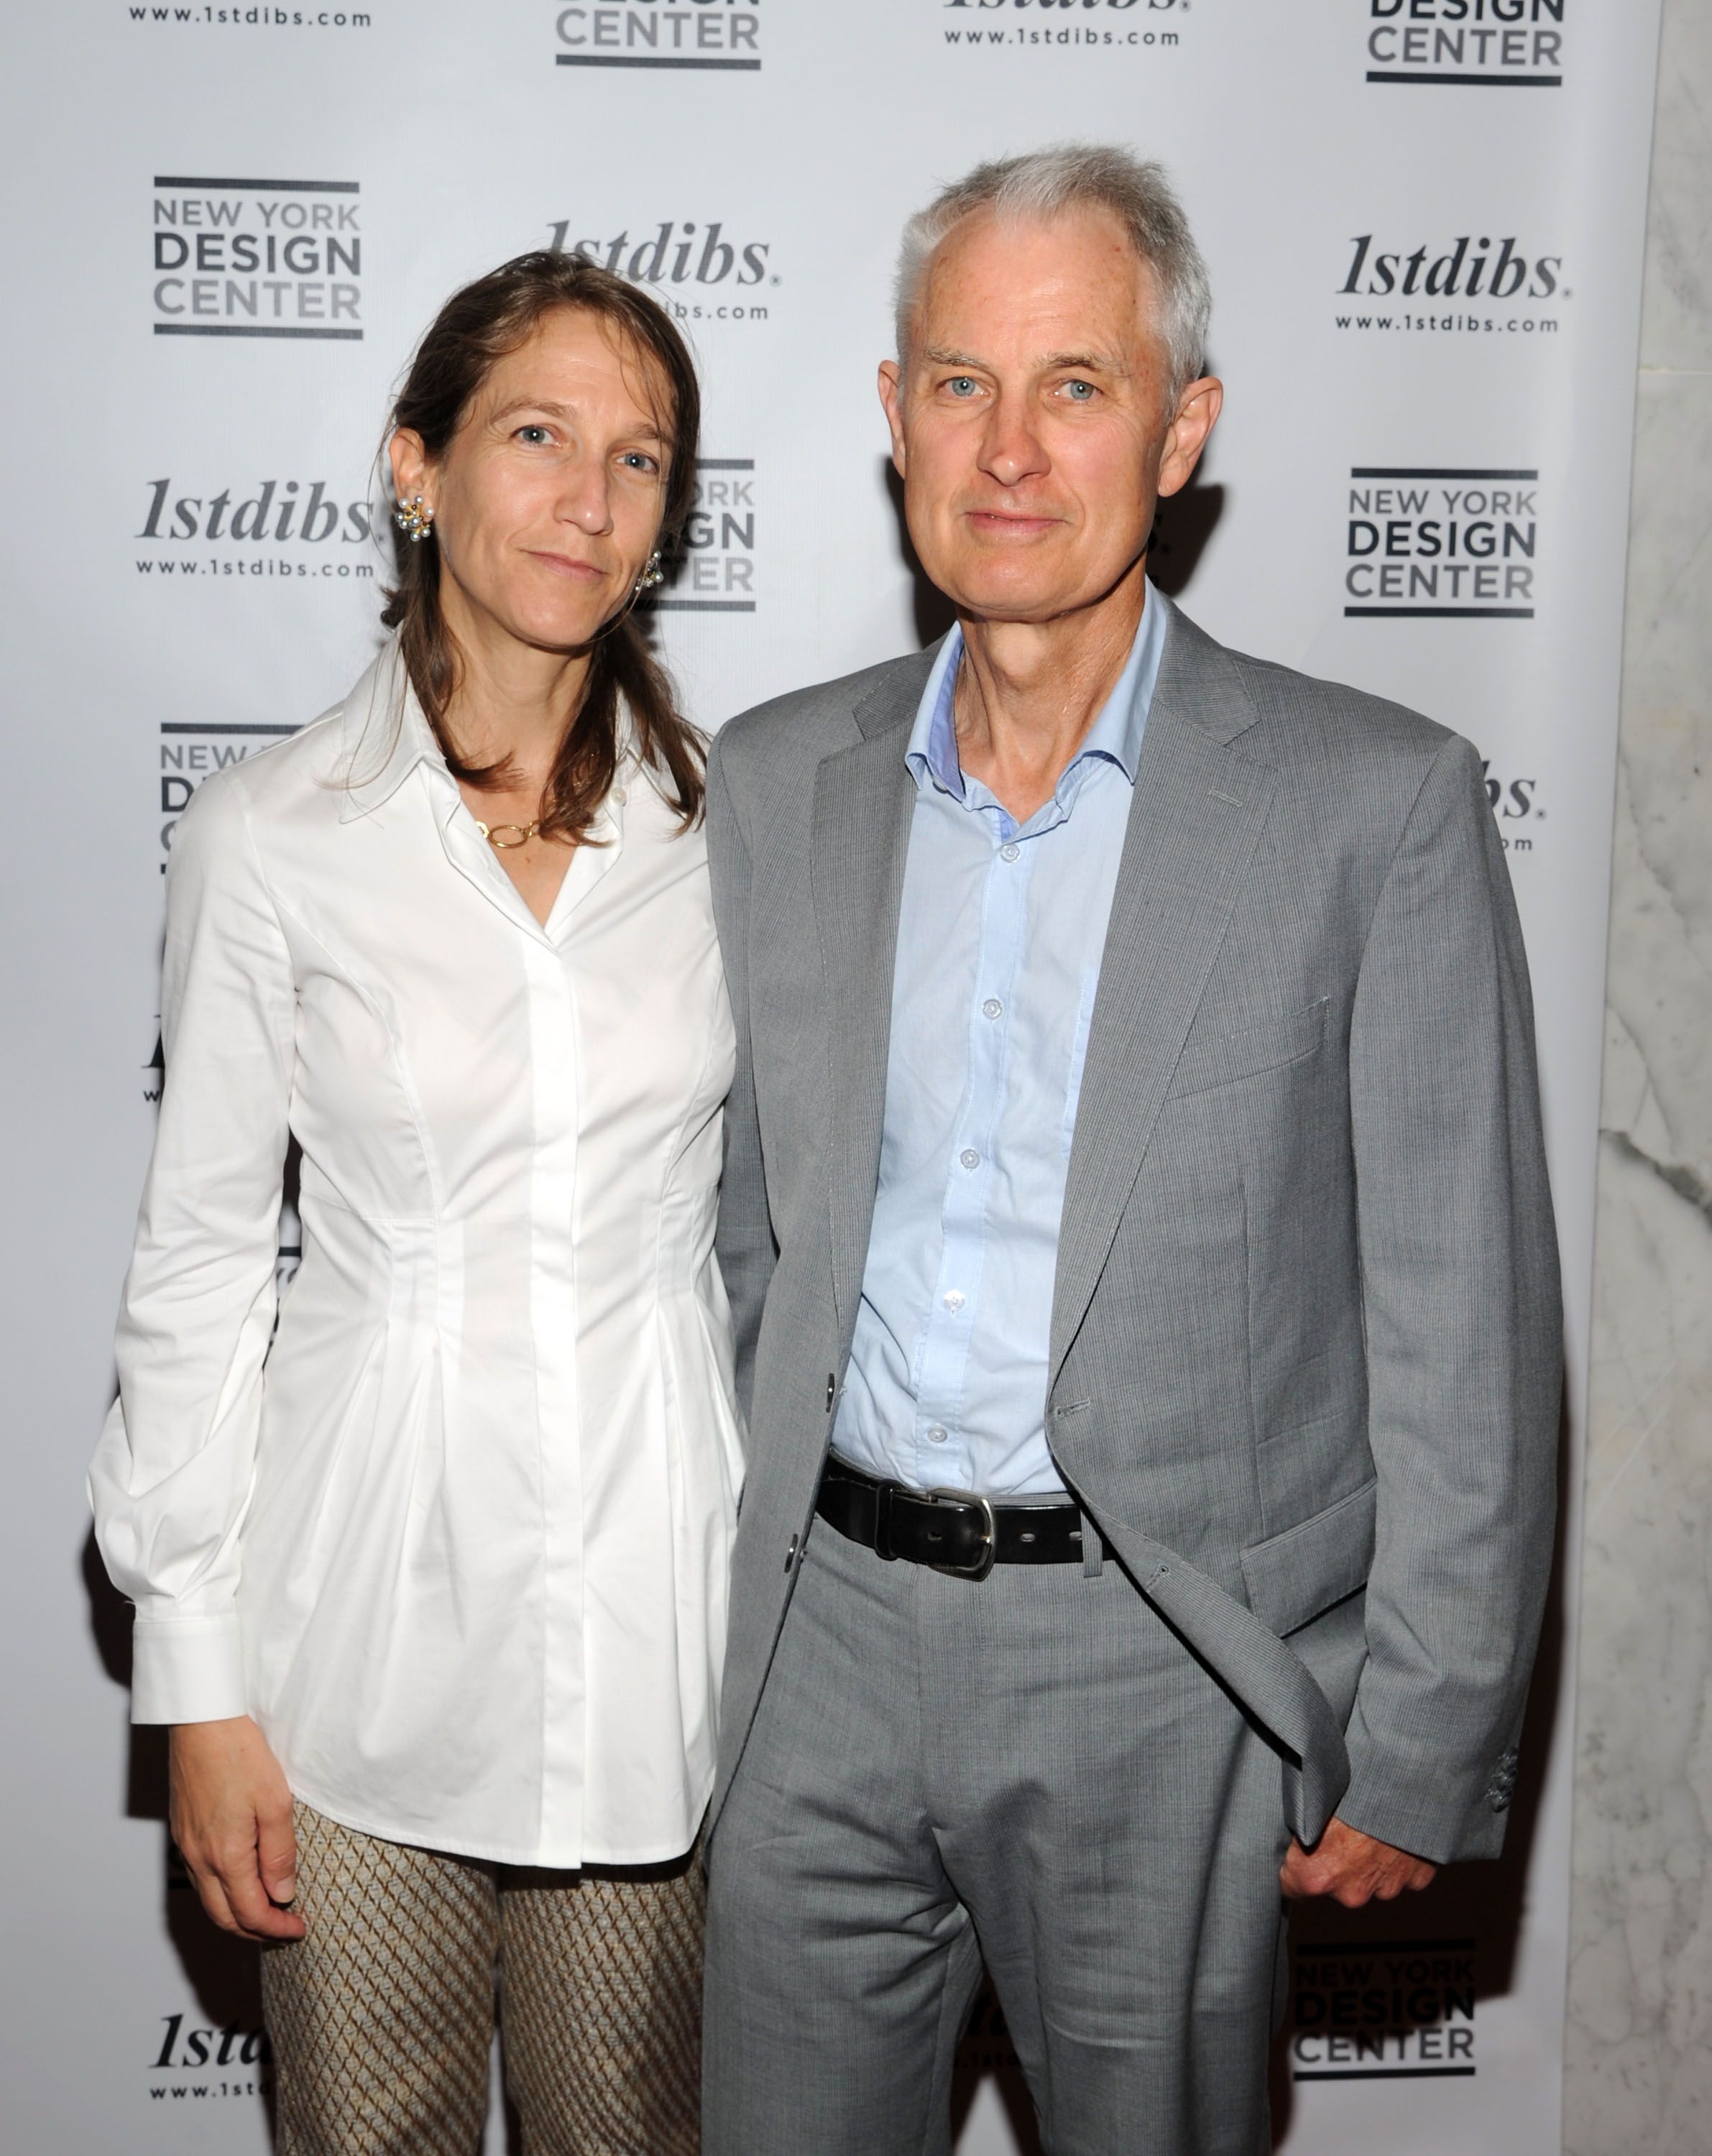 Stan Stokowski and Emily Goldstein during the "The World Of Gloria Vanderbilt: Collages, Dream Boxes, And Recent Paintings" Exhibition Opening at 1stdibs Gallery on September 12, 2012, in New York City. | Source: Getty Images